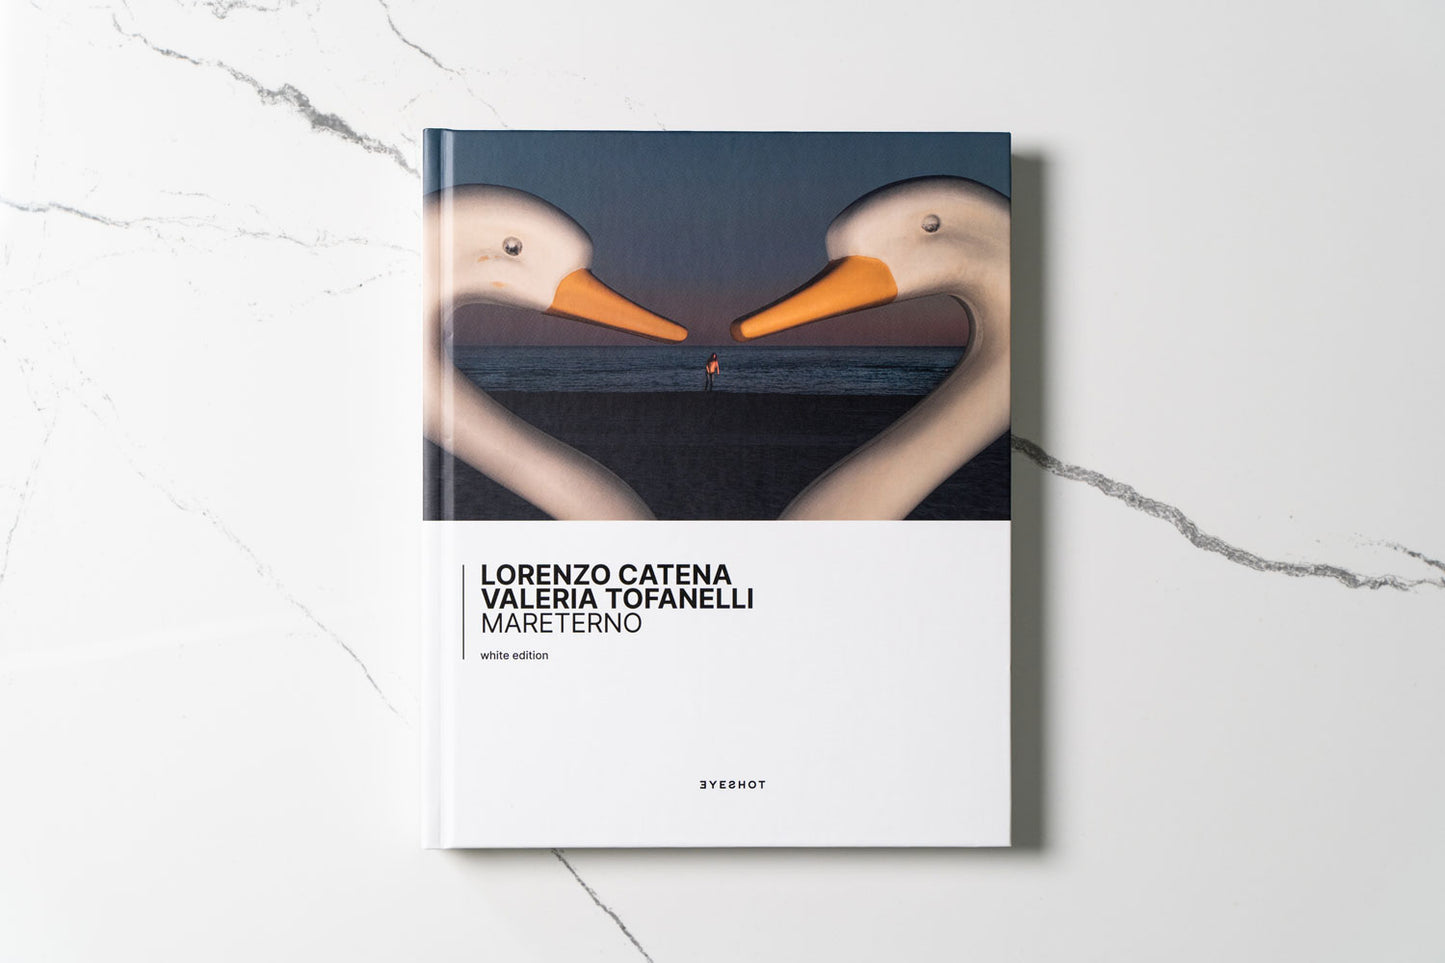 Mareterno by Lorenzo Catena and Valeria Tofanelli (White Edition, signed and numbered)